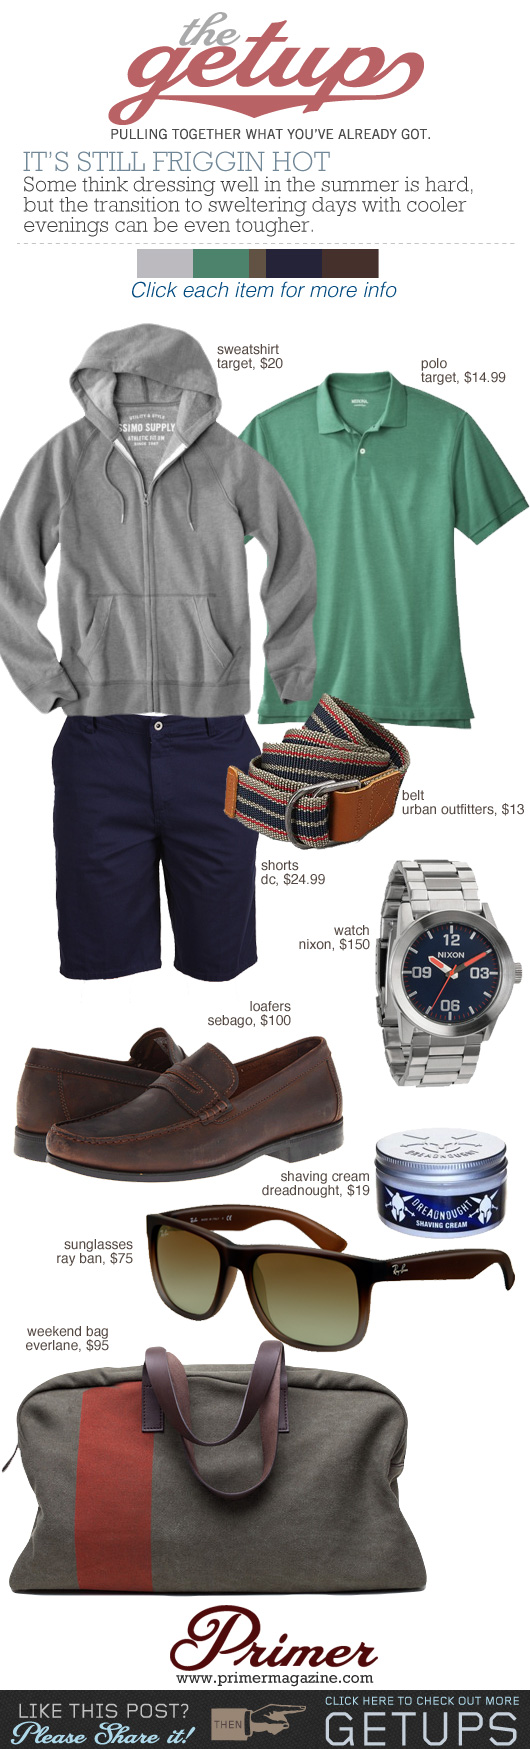 The Getup Still Hot: Men\'s outfit inspiration with gray sweatshirt, green shirt, blue shorts, and blue loafers